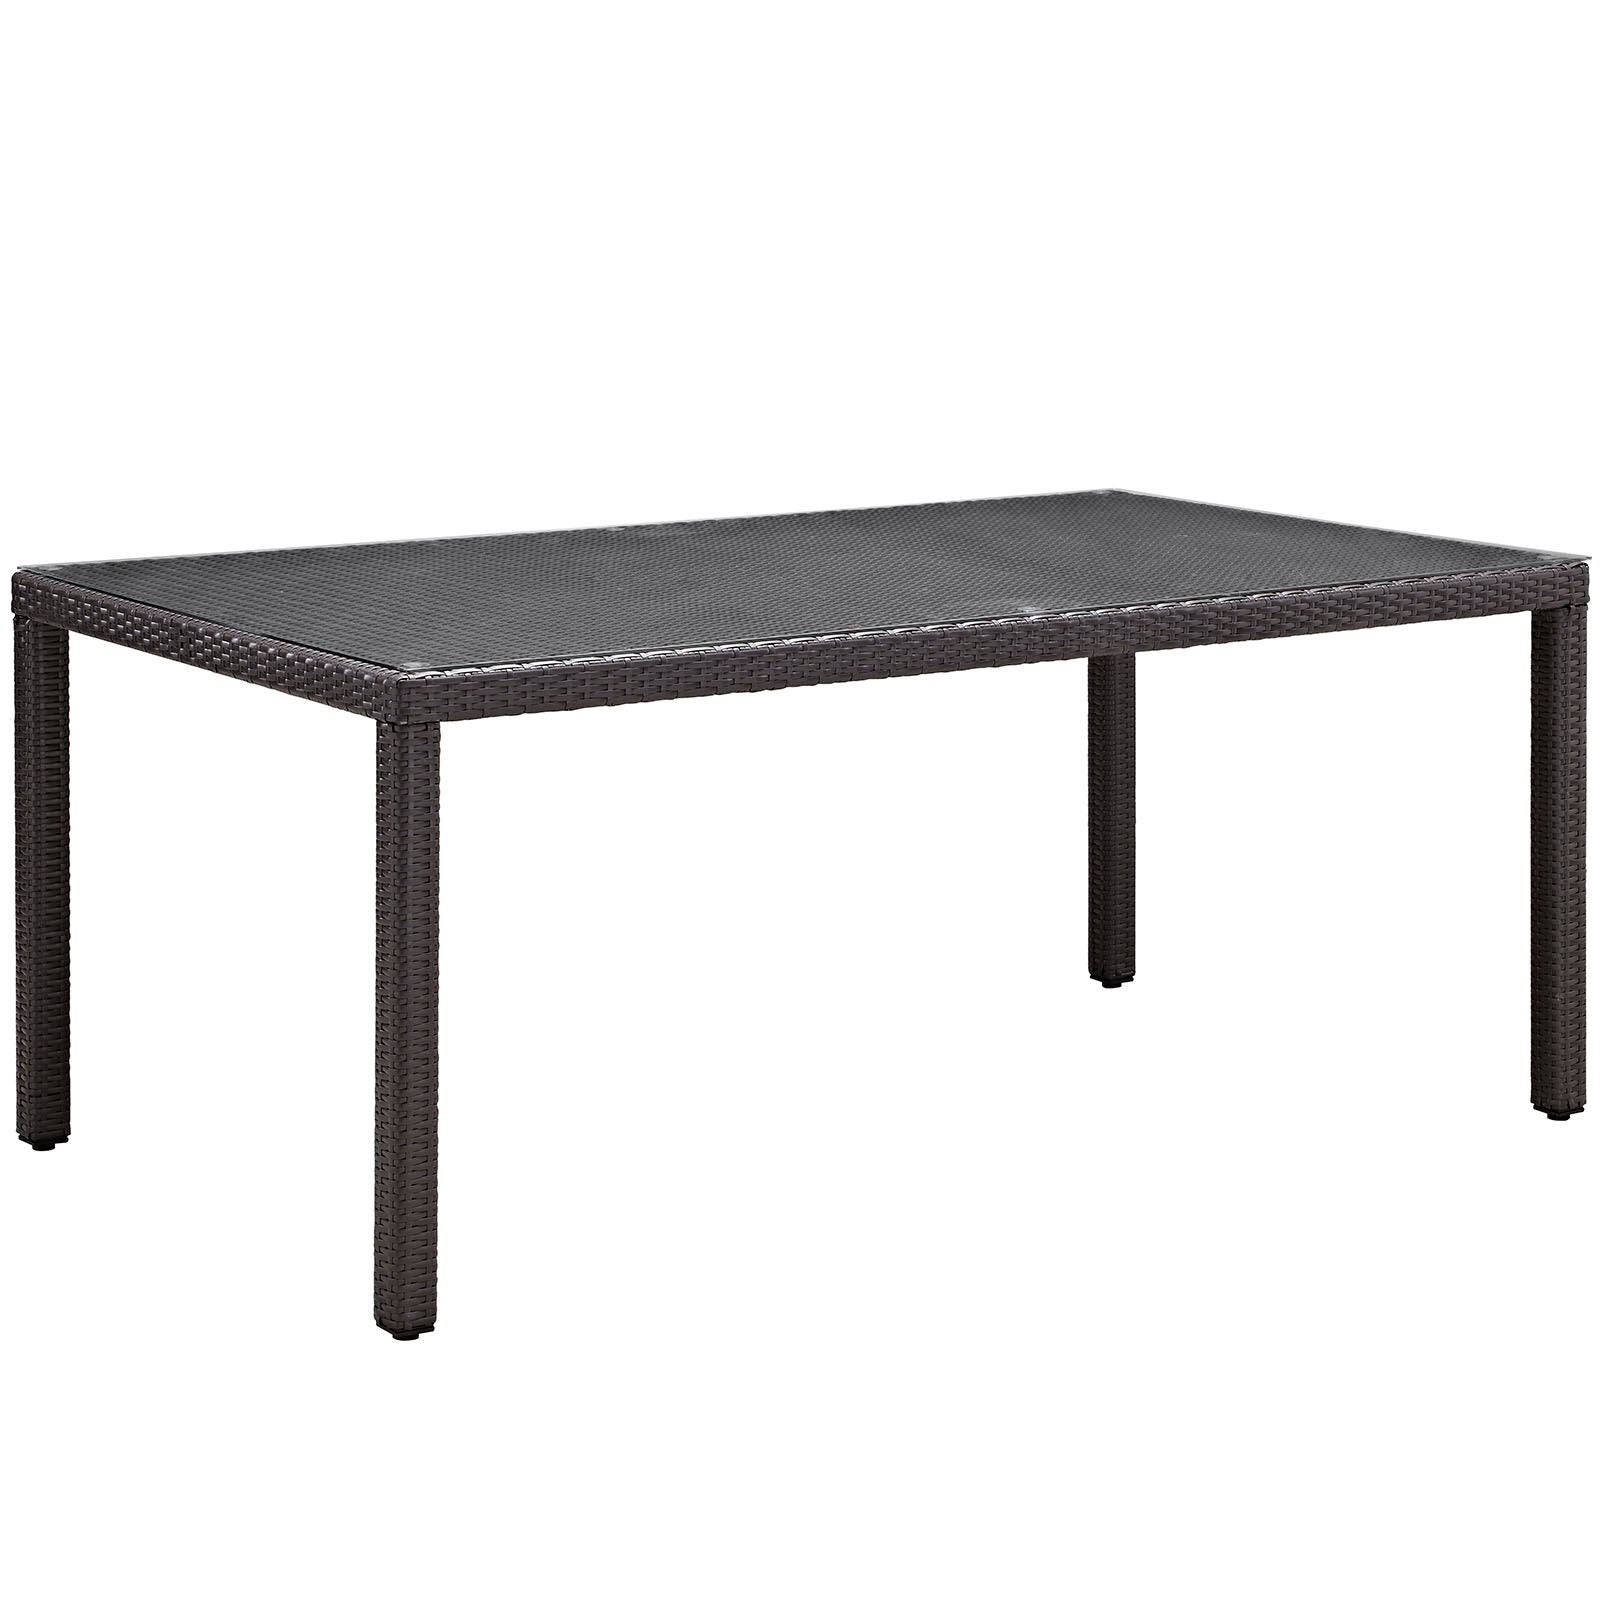 Convene 70" Outdoor Patio Dining Table - East Shore Modern Home Furnishings